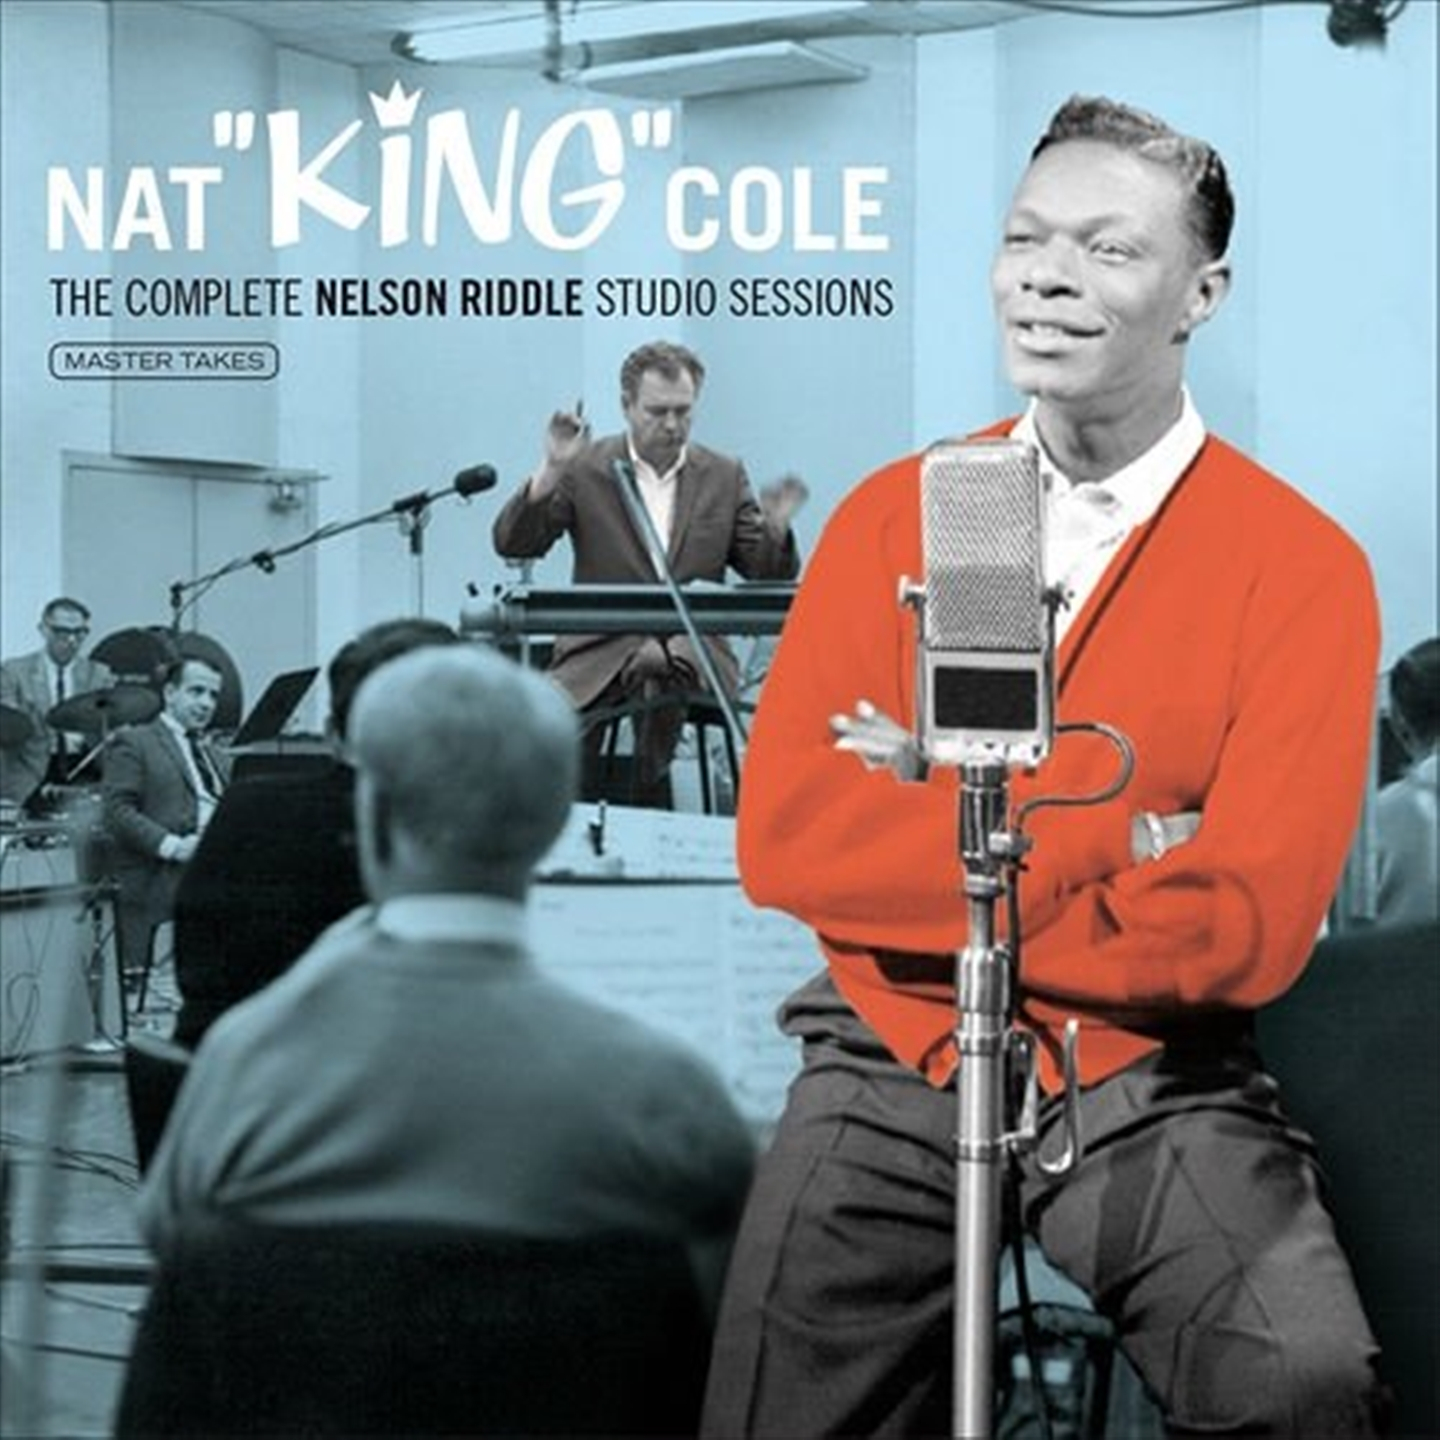 THE COMPLETE NELSON RIDDLE STUDIO SESSIONS - MASTER TAKES